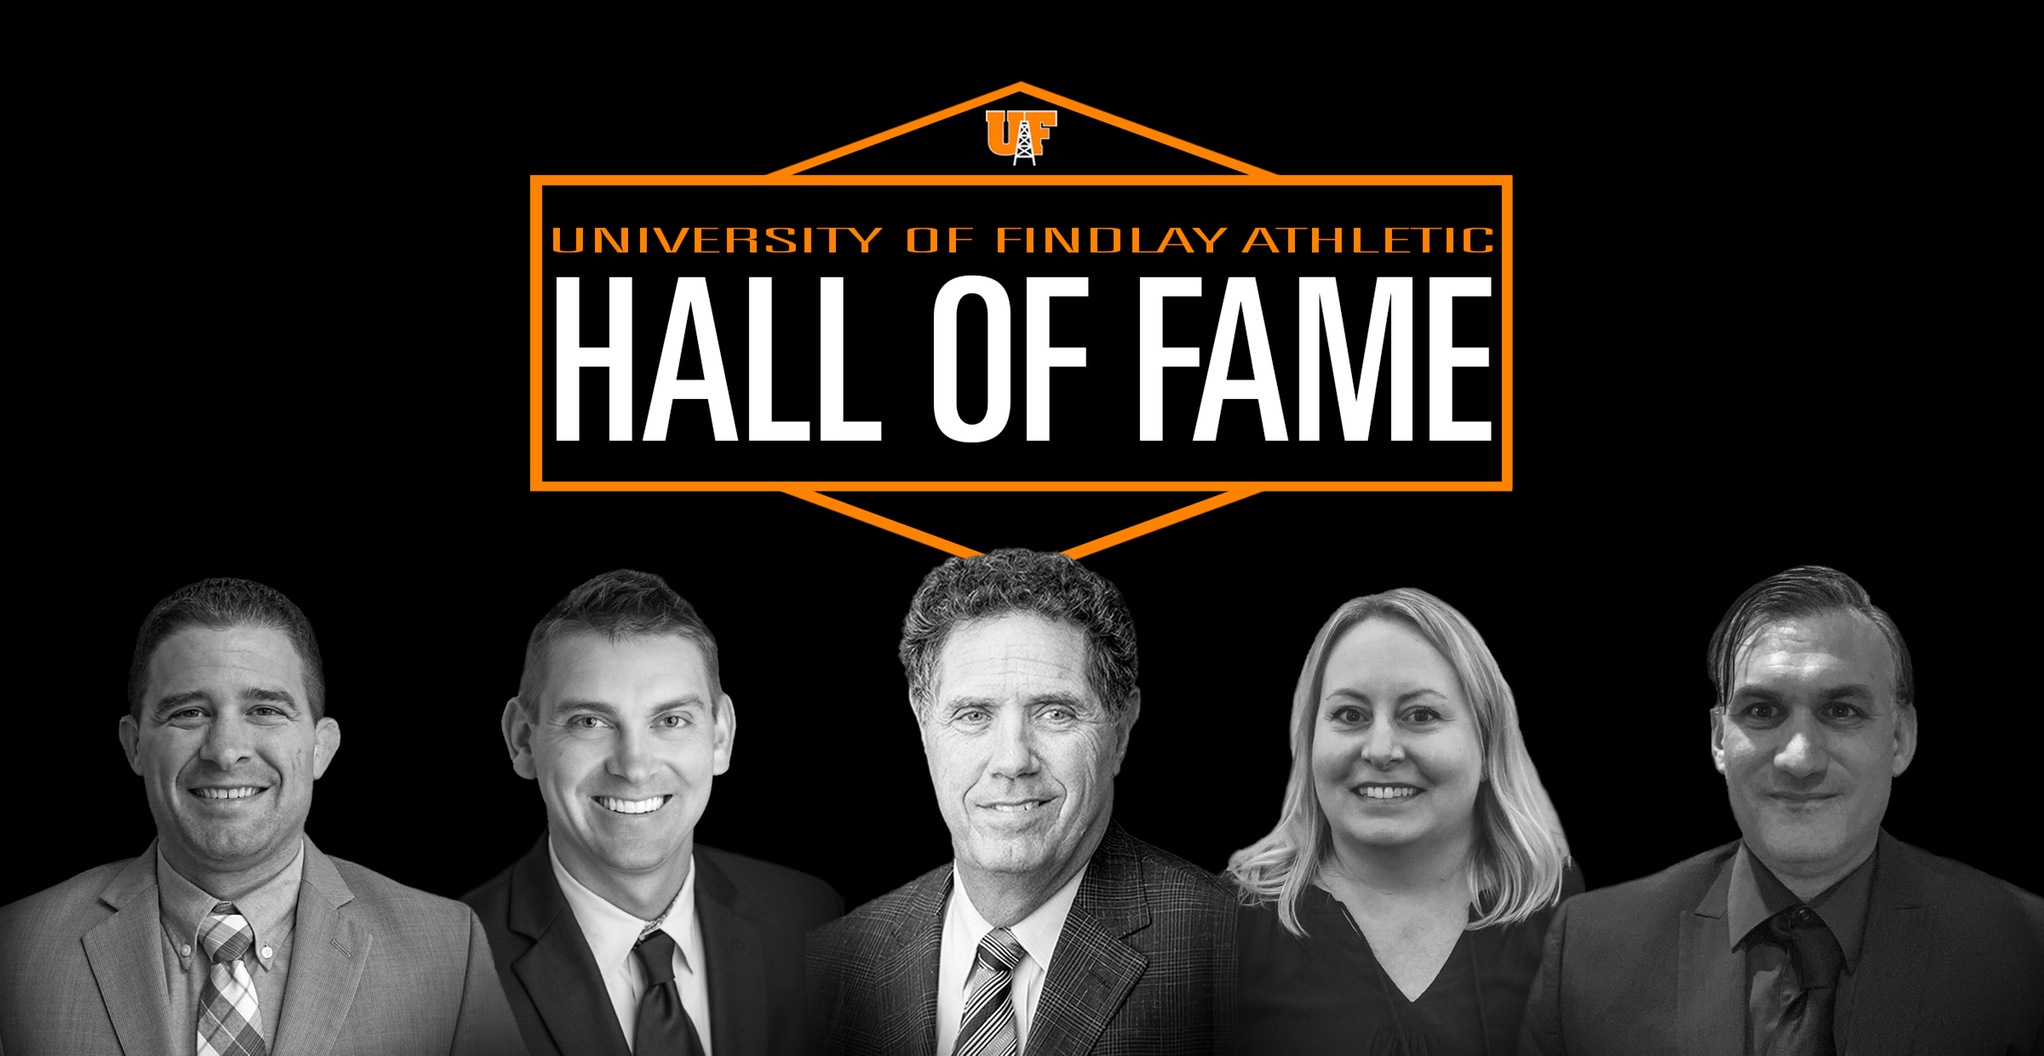 Hall of Fame Ceremony Slated for Feb. 1